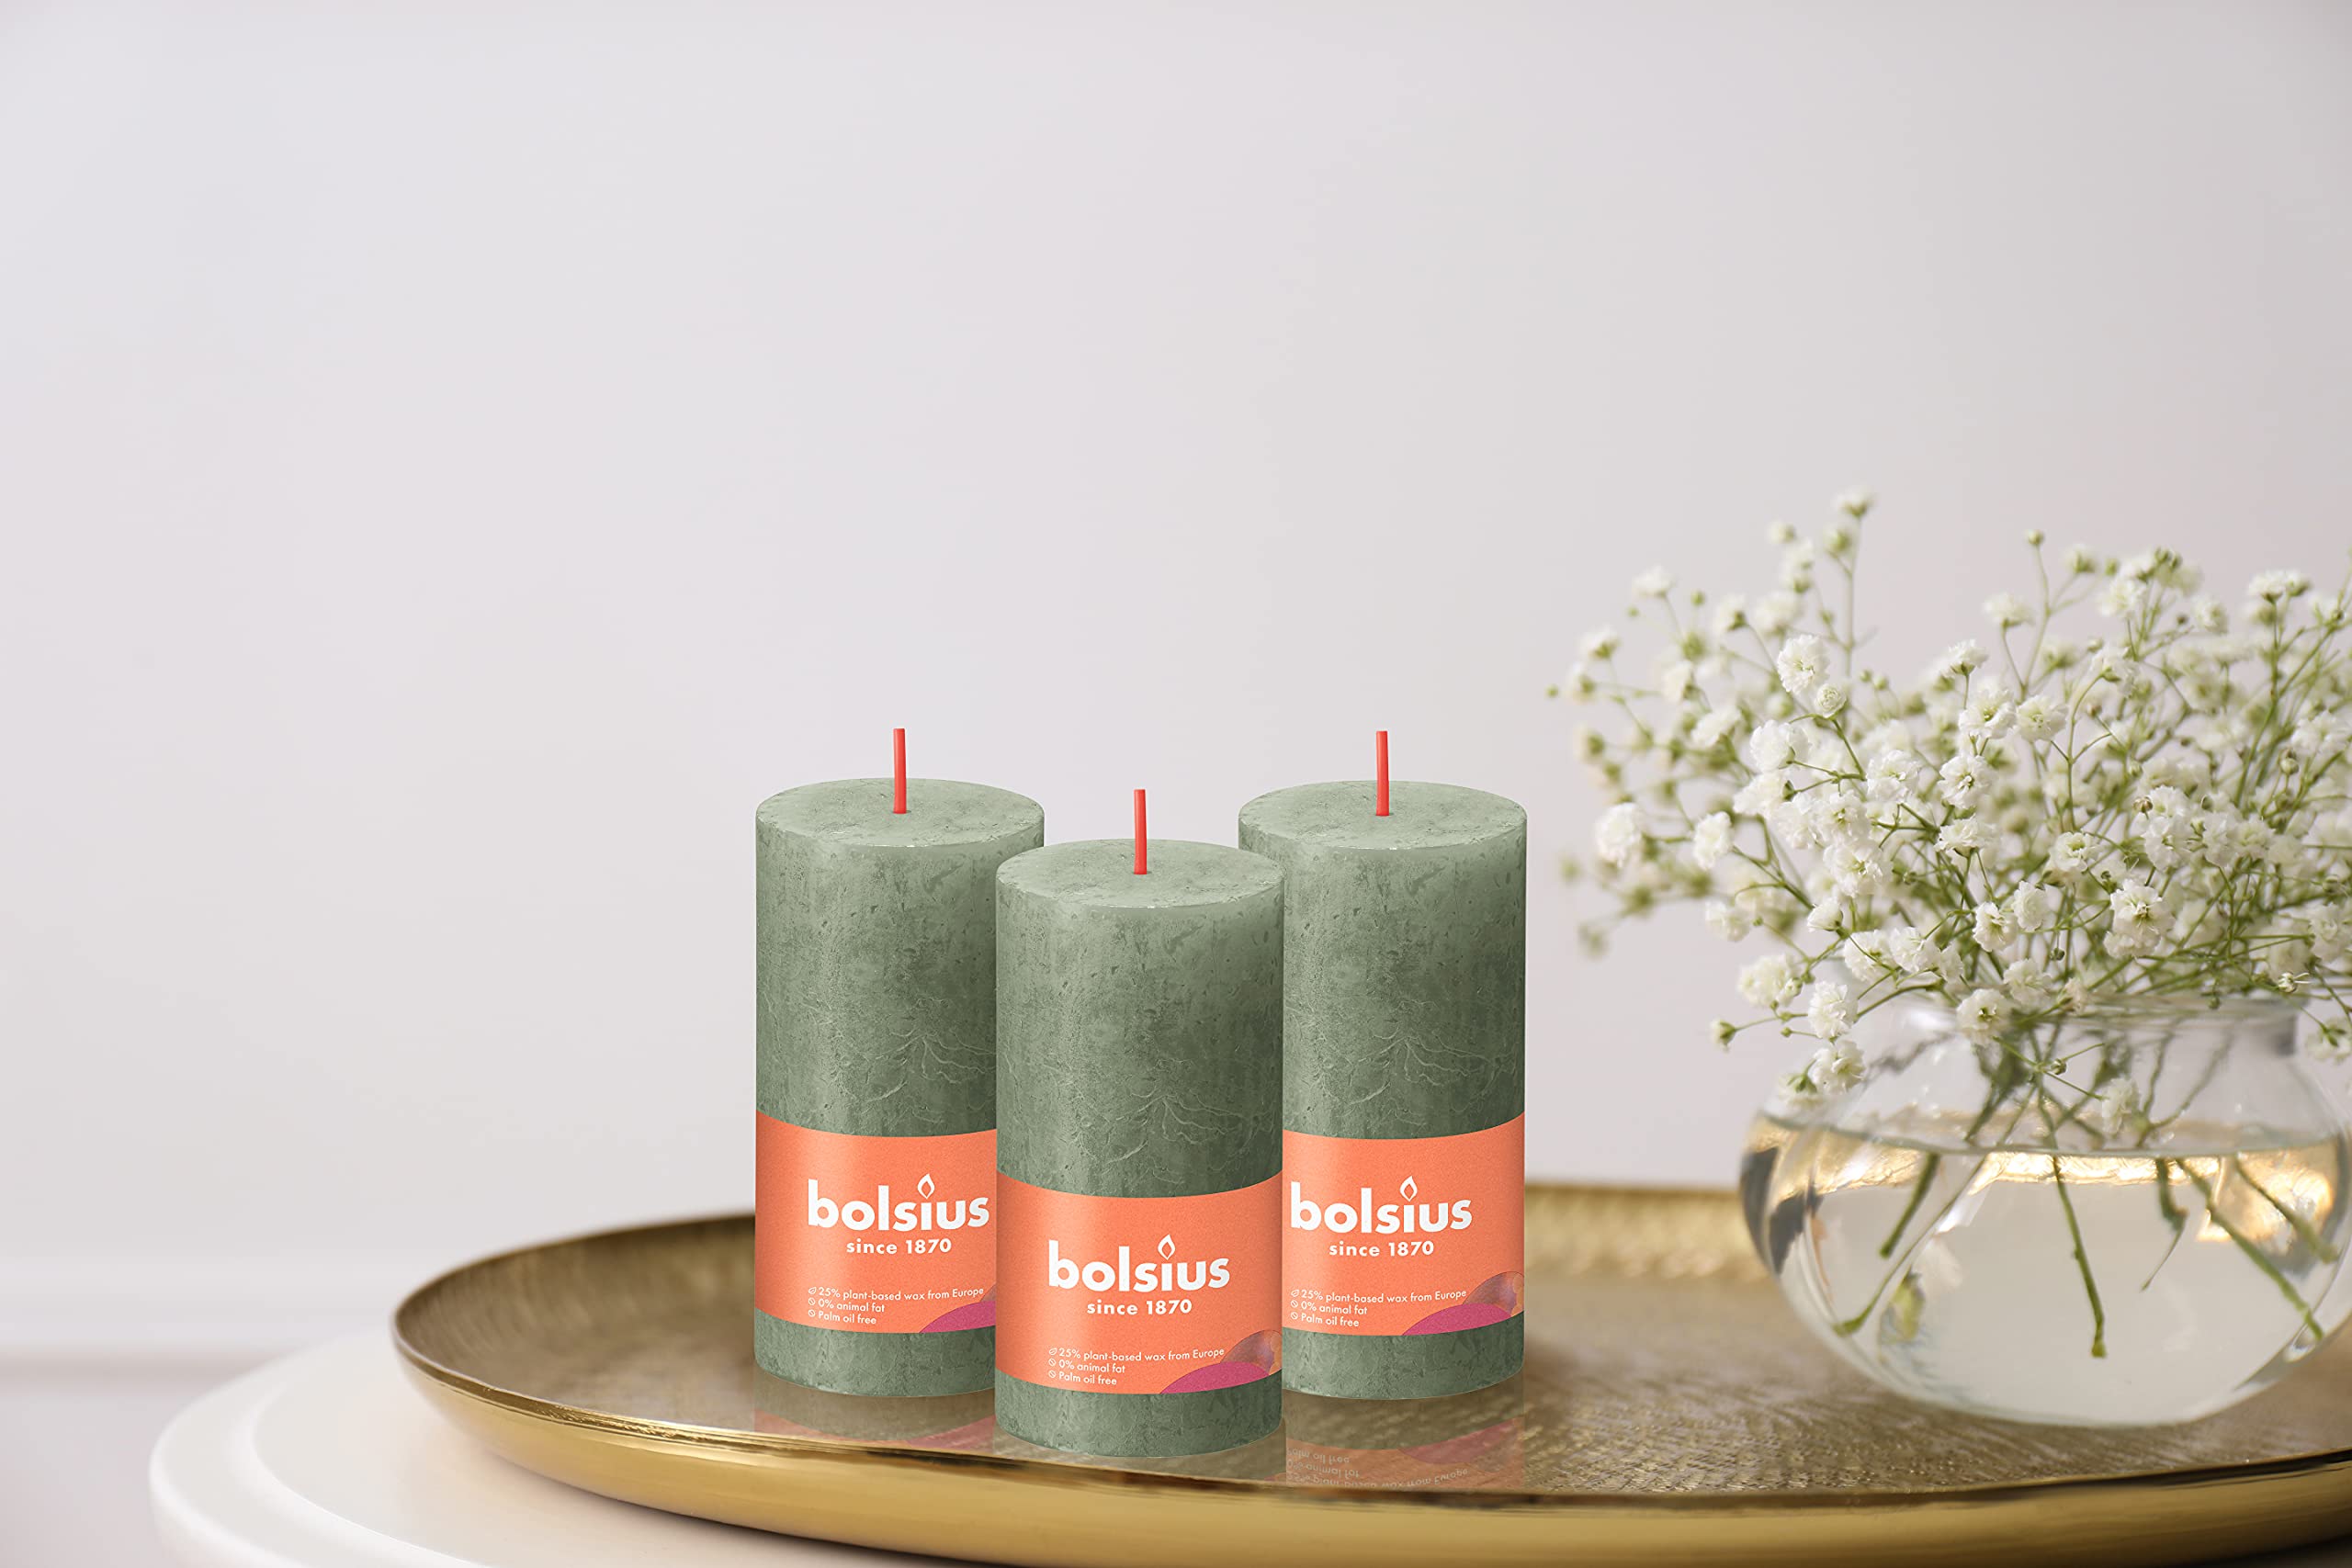 BOLSIUS 4 Pack Fresh Olive Rustic Pillar Candles - 2 X 4 Inches - Premium European Quality - Includes Natural Plant-Based Wax - Unscented Dripless Smokeless 30 Hour Party and Wedding Candles  - Like New